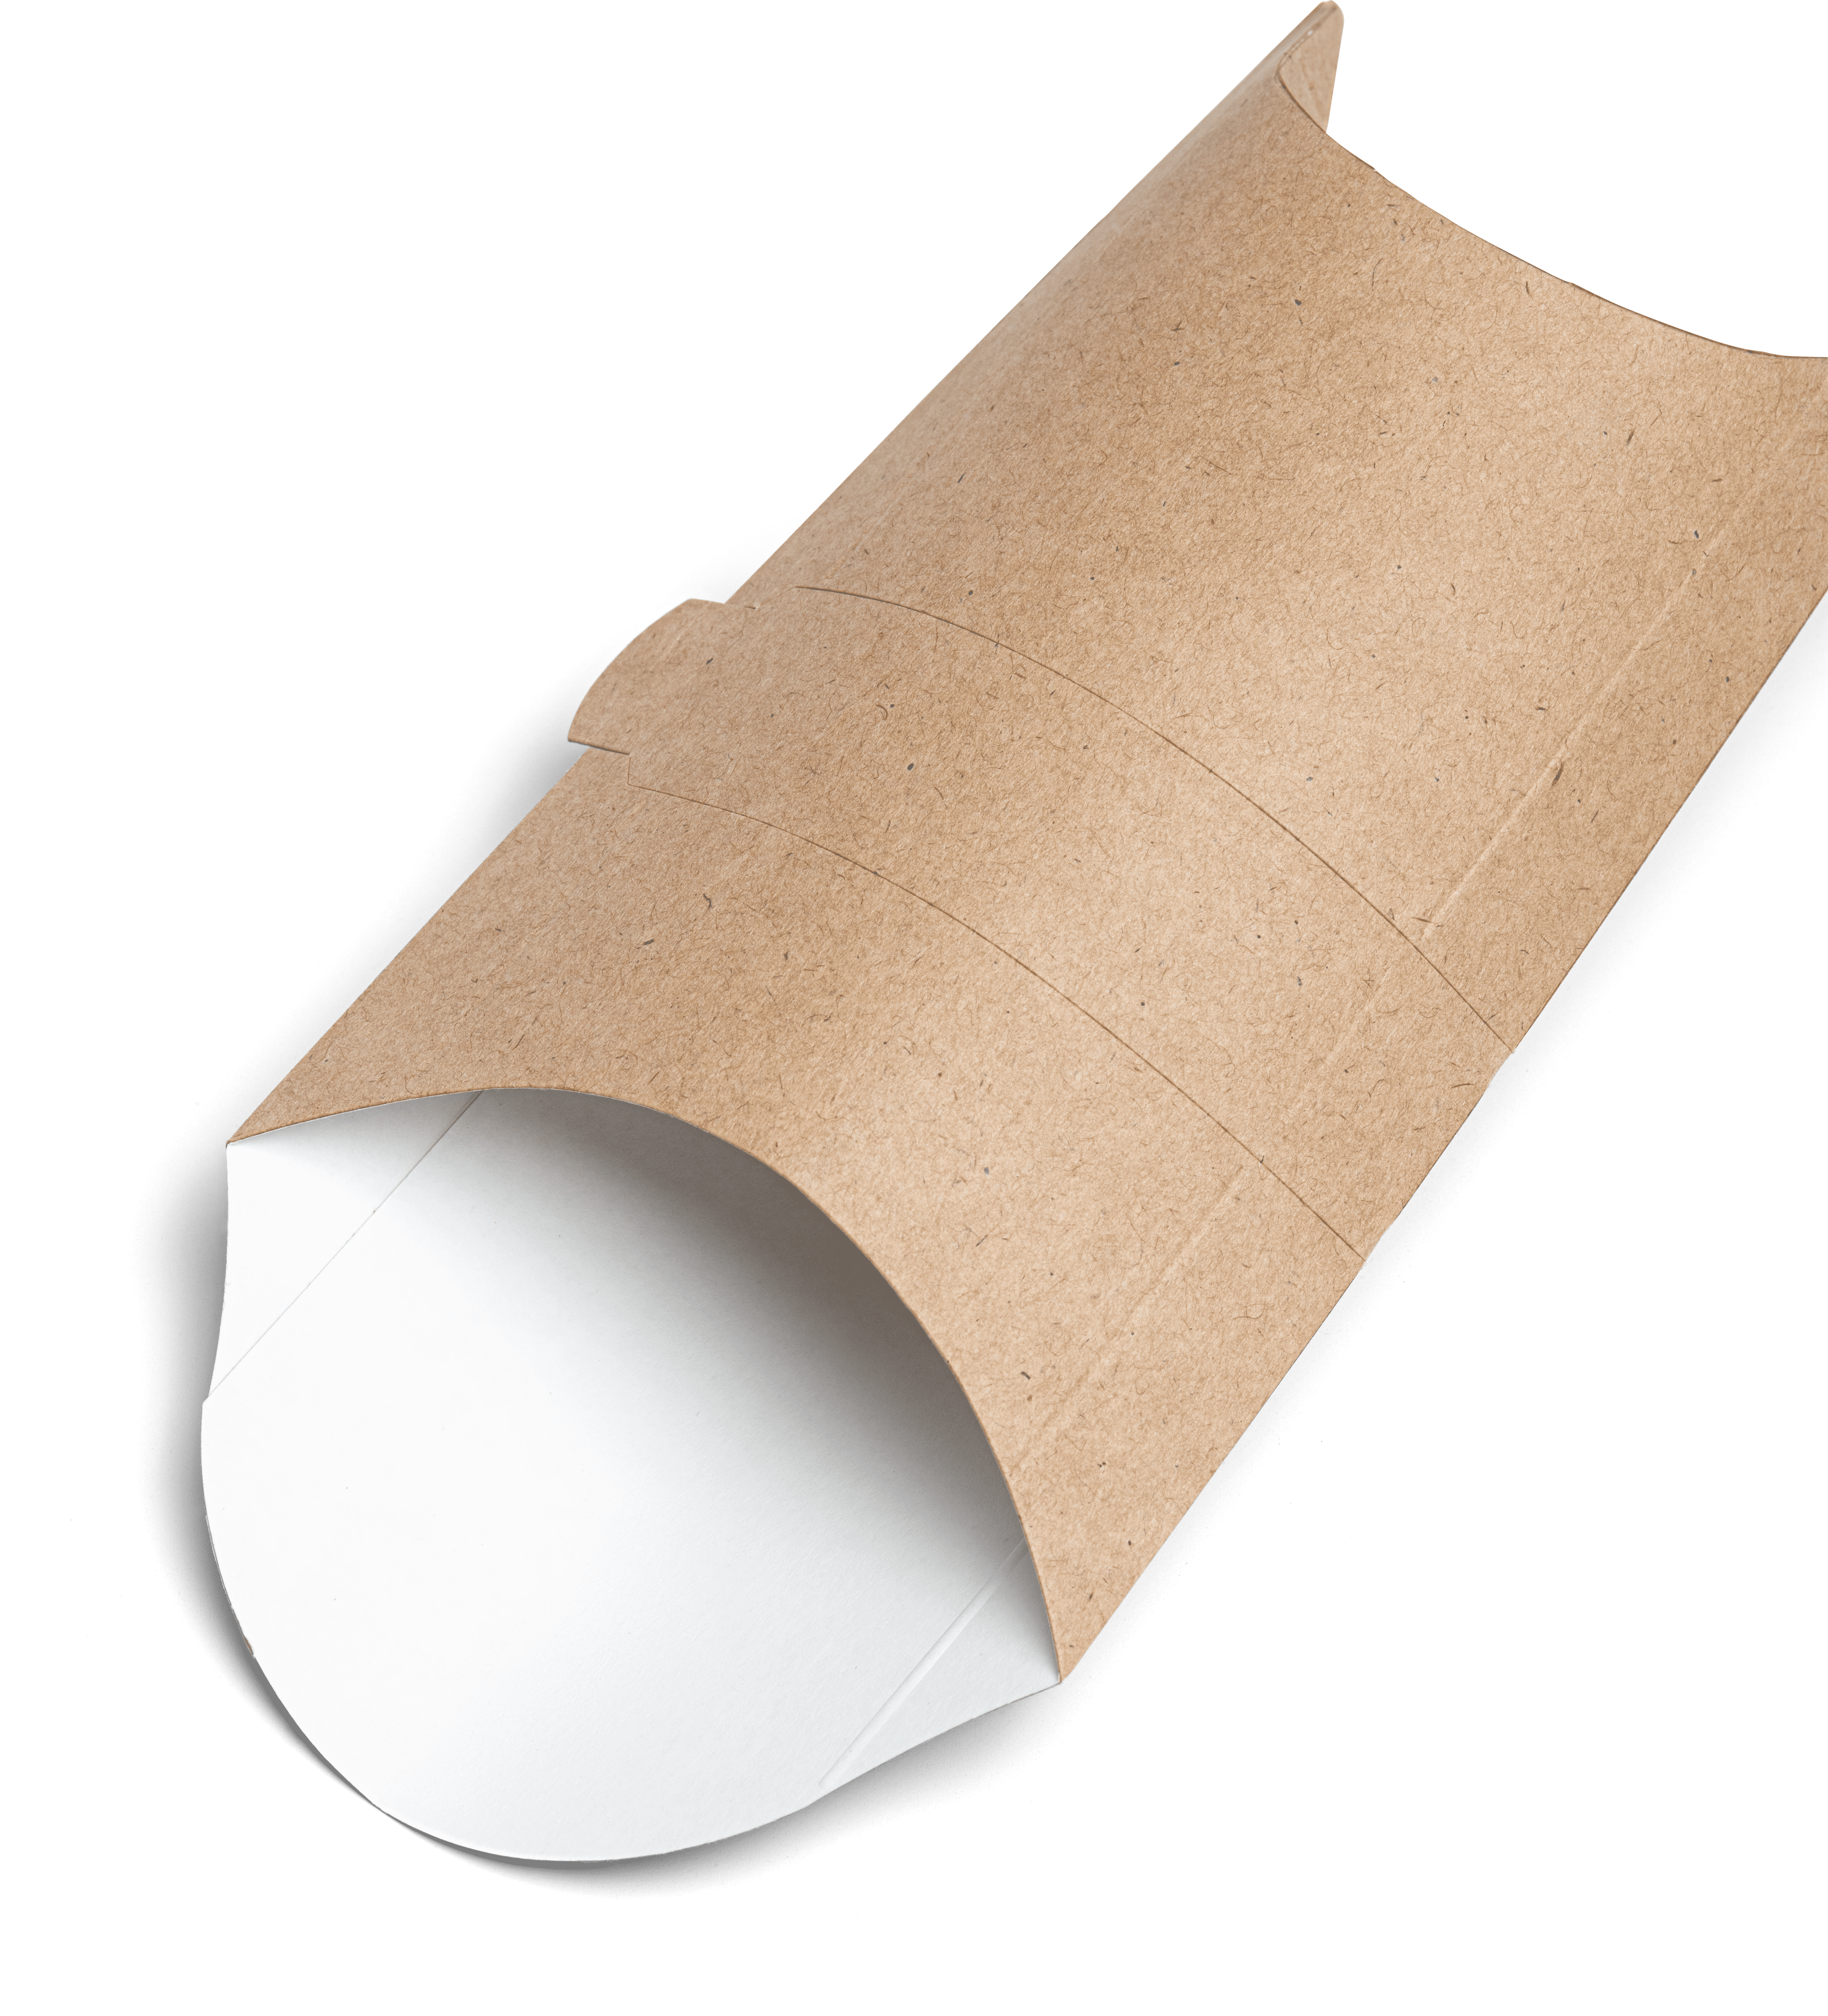 OSQ PILLOW S packaging for rolls